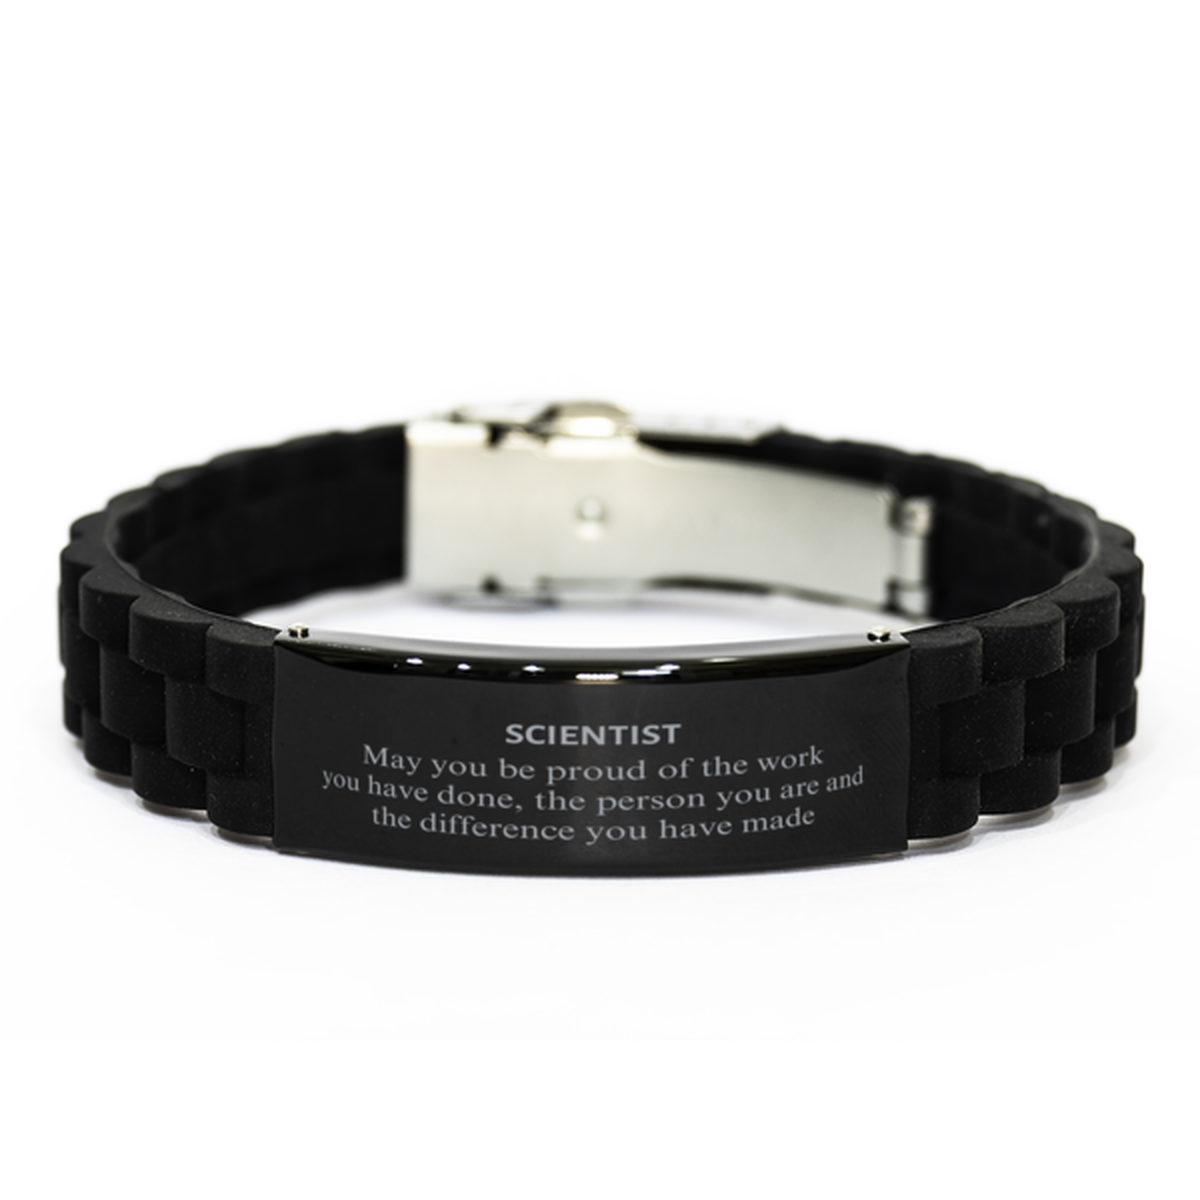 Scientist May you be proud of the work you have done, Retirement Scientist Black Glidelock Clasp Bracelet for Colleague Appreciation Gifts Amazing for Scientist